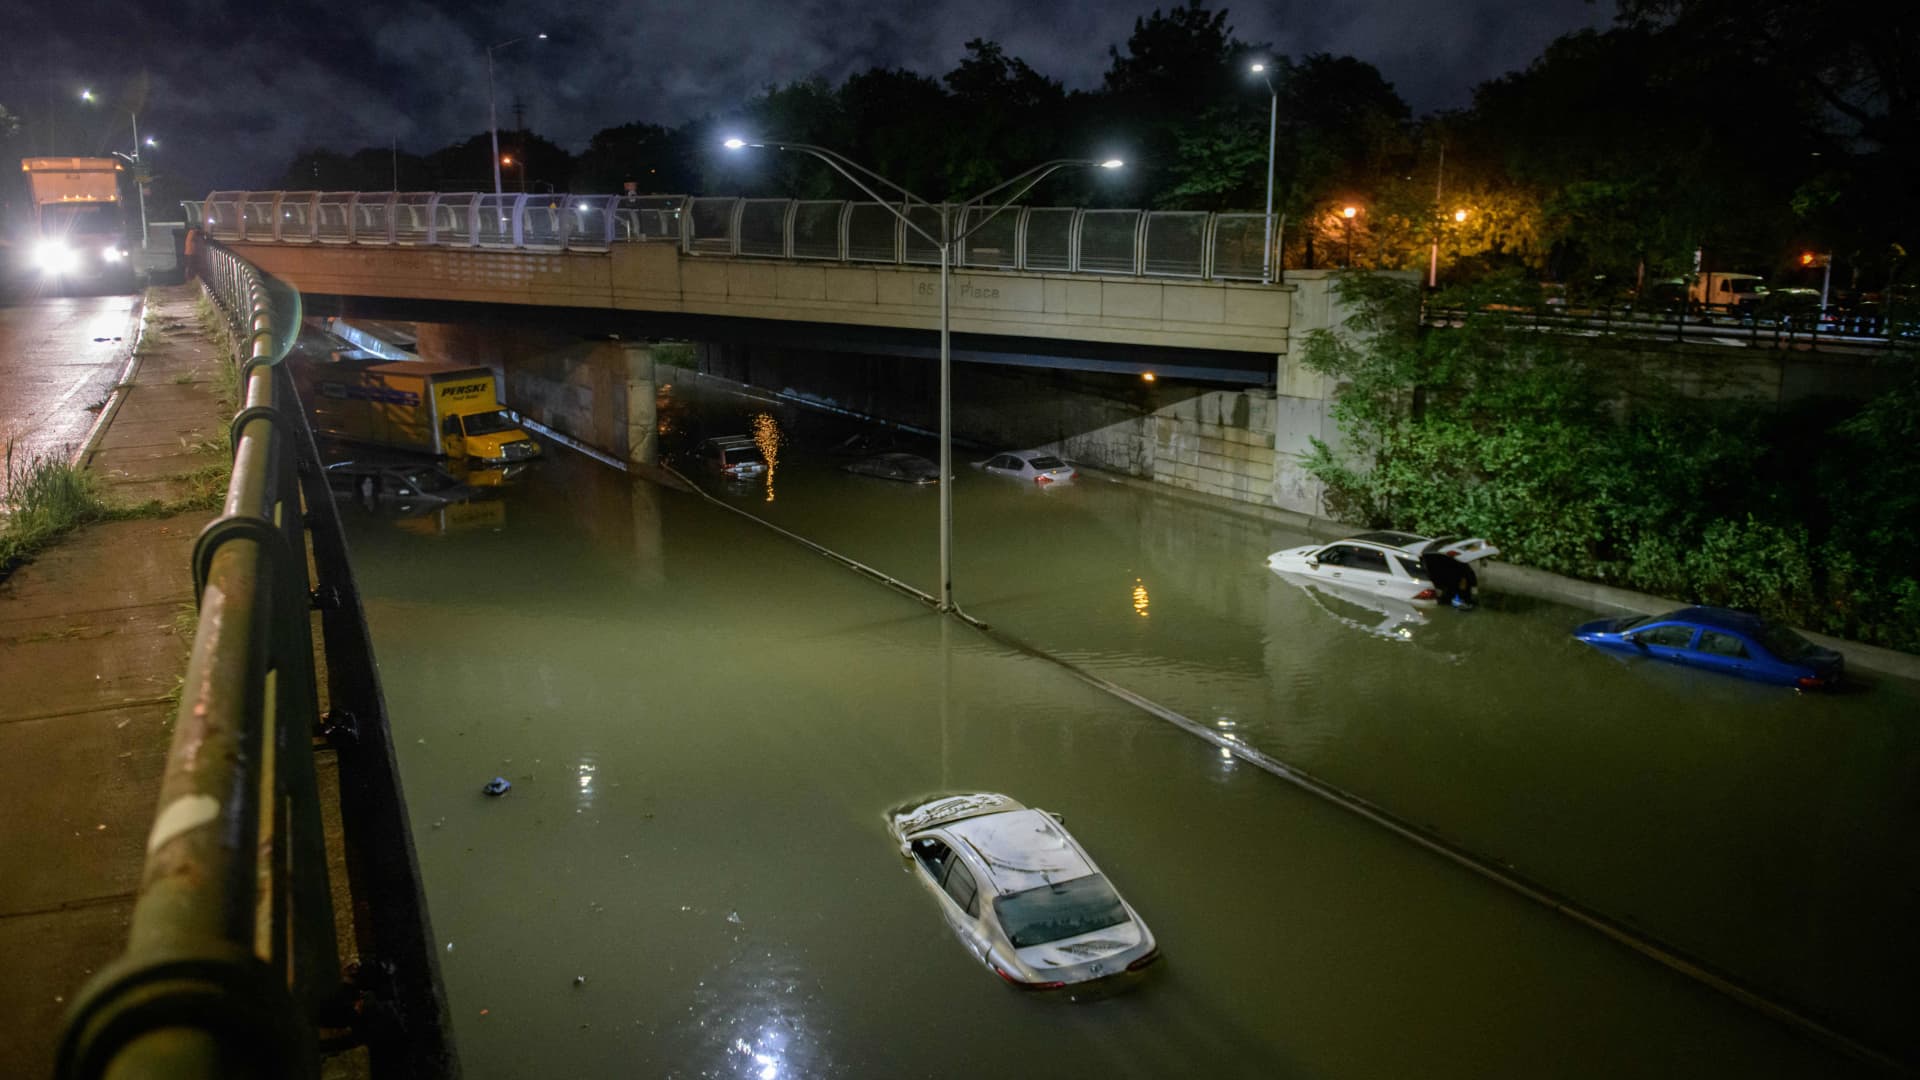 Floodwater surrounds vehicles following heavy rain on an expressway in Brooklyn, New York.